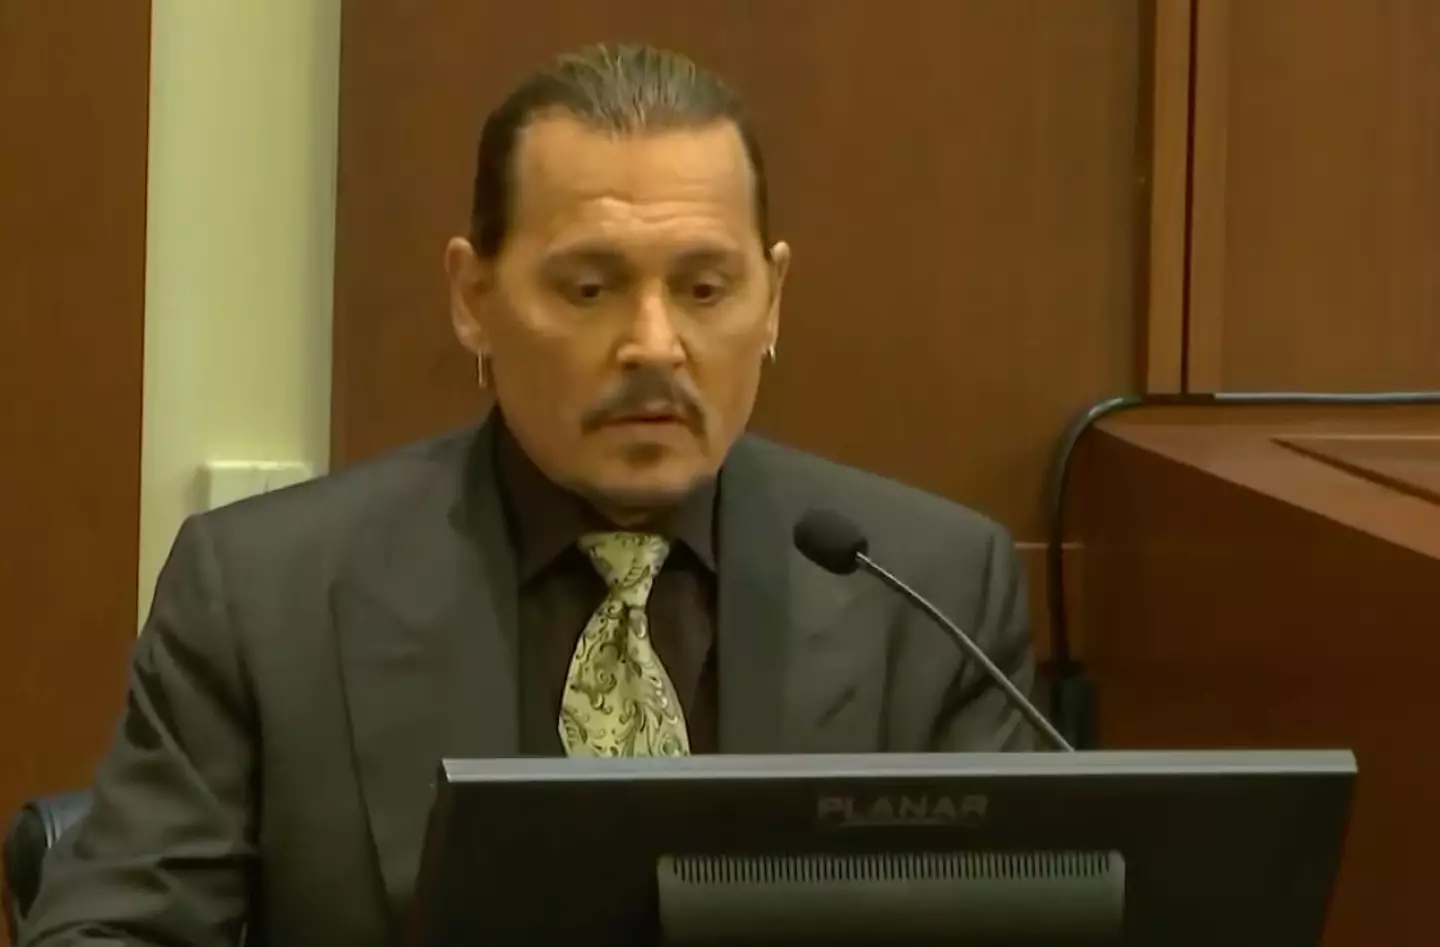 Johnny Depp took to the stand today.